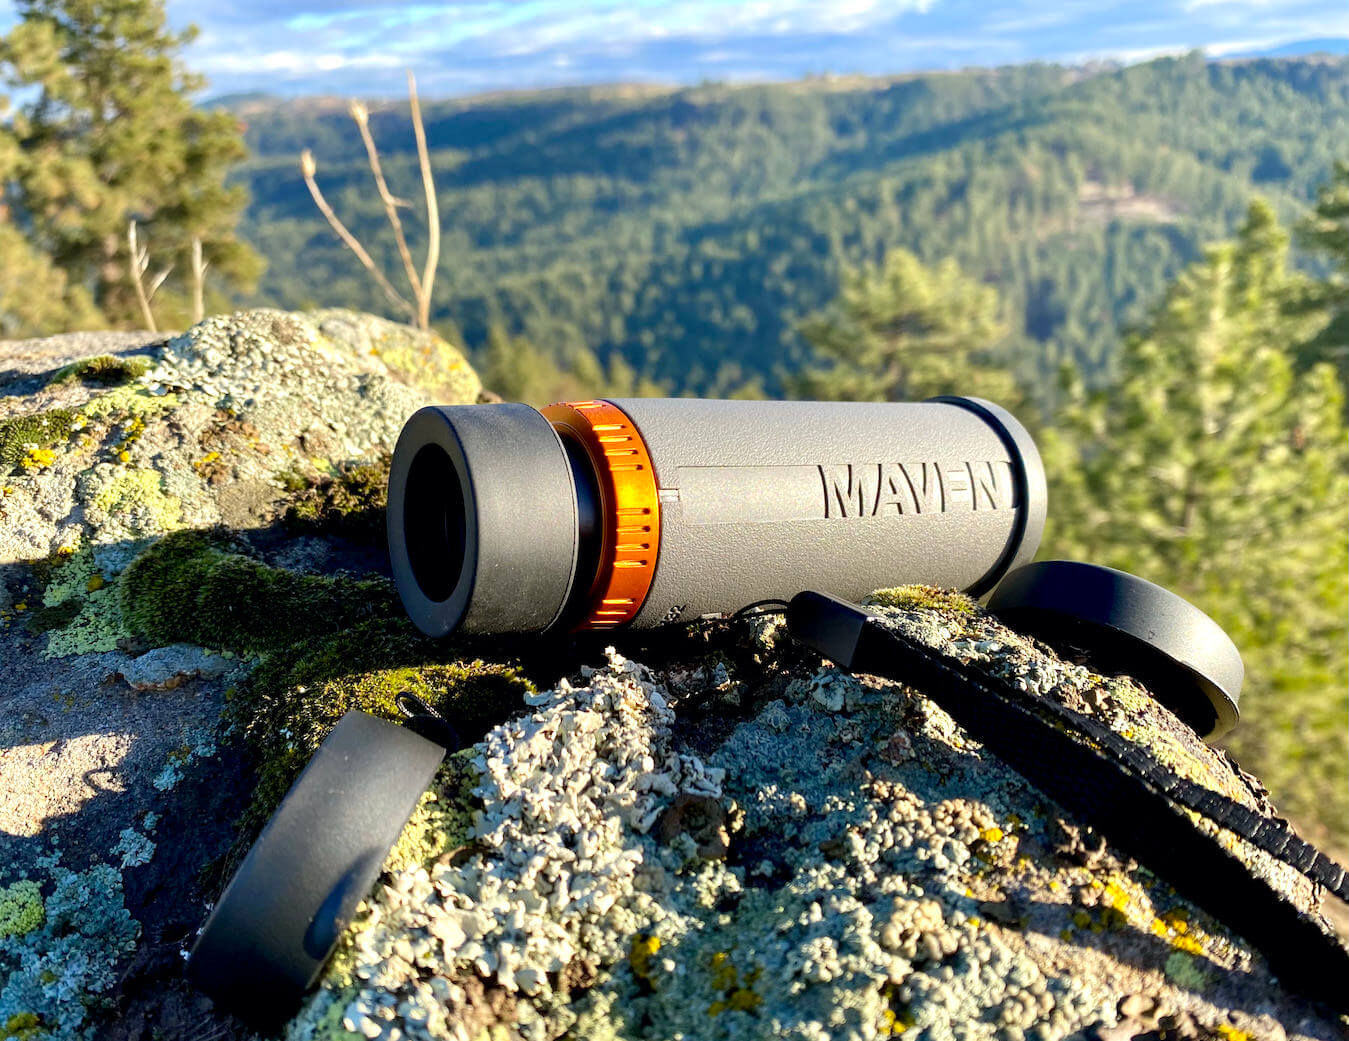 This photo shows the Maven CM.1 Monocular on a rock outside during the testing and review process.